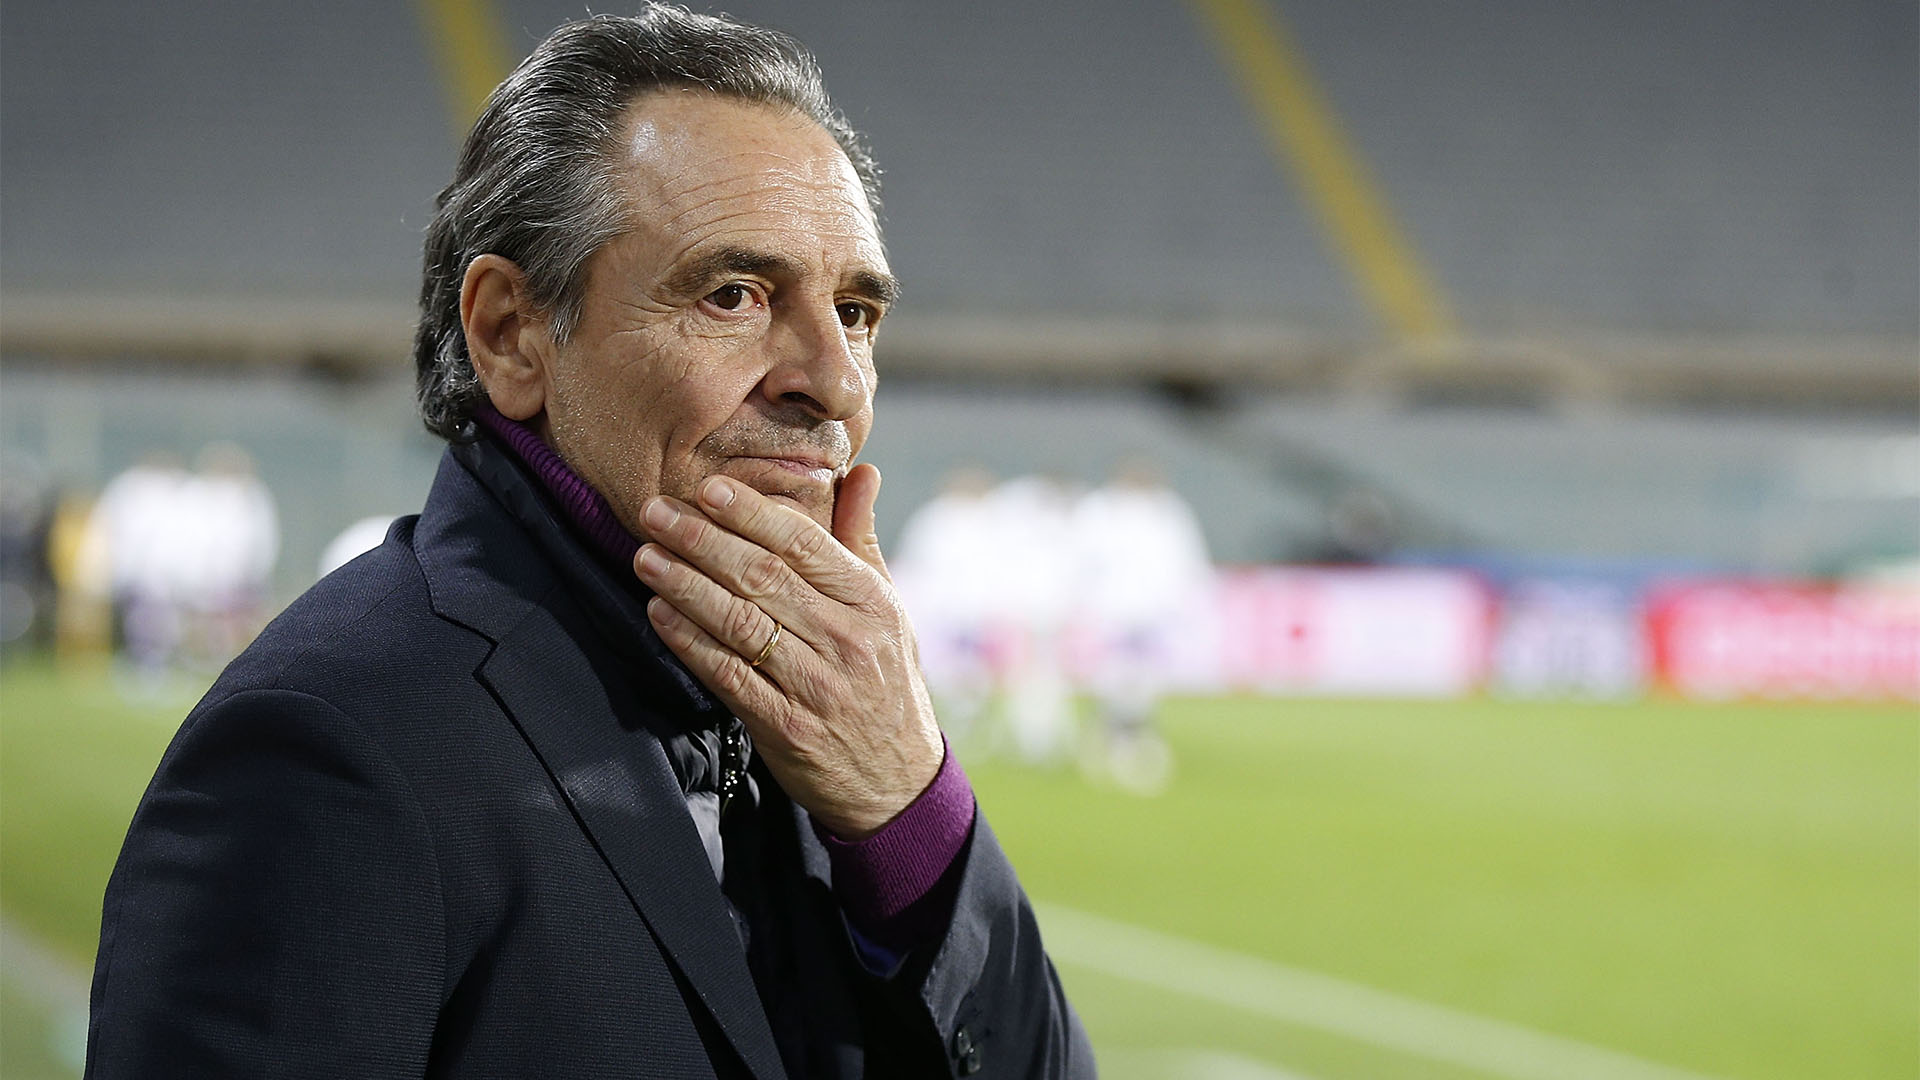 Cesare Prandelli has backed Fiorentina to aim high following a season where they finished runners-up on two occasions, in the UECL and Coppa Italia.